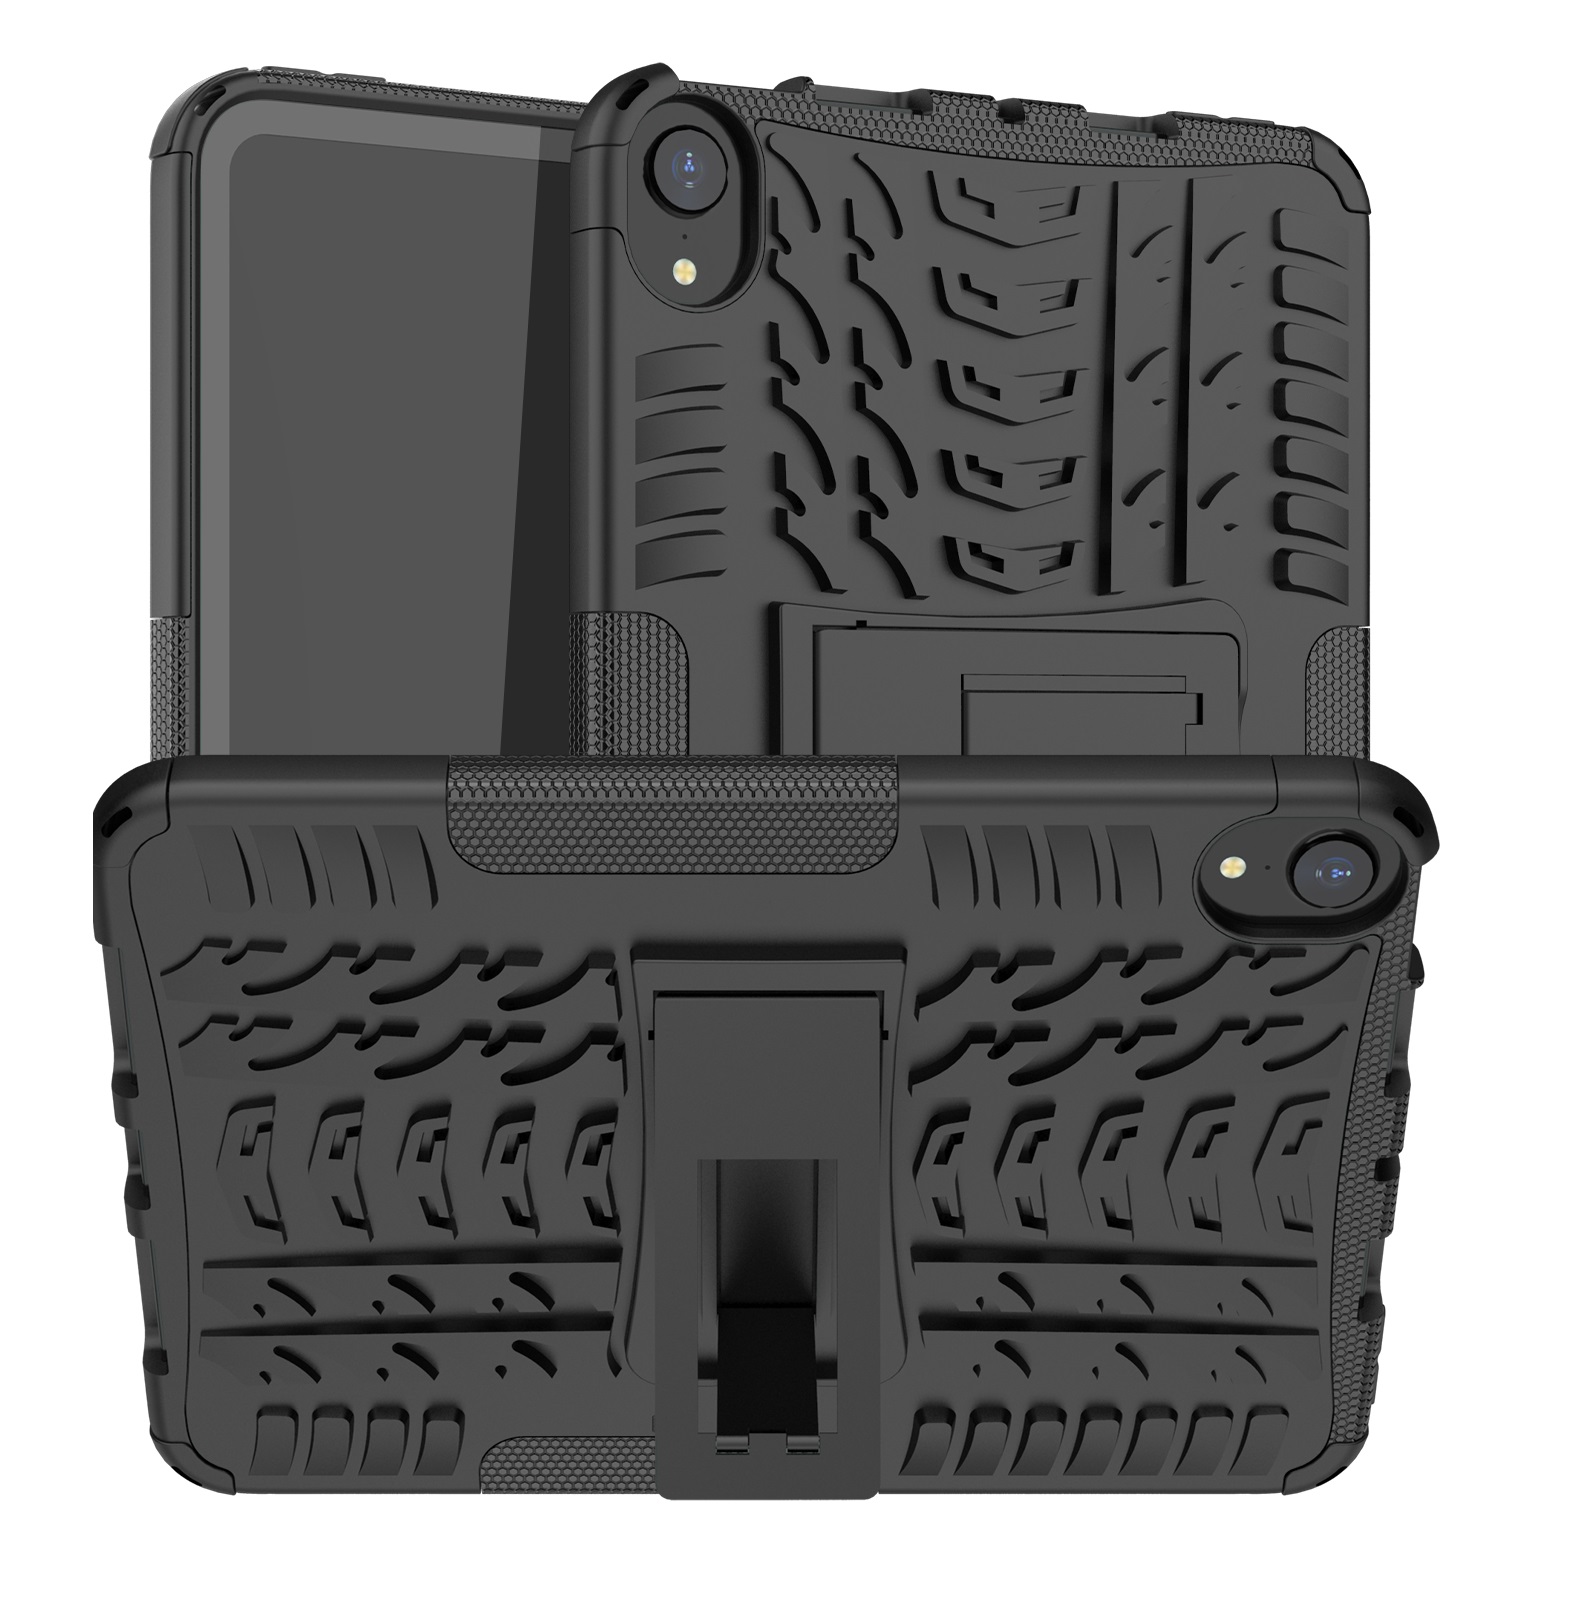 Dazzle Ipad Mini 6 2021 Rugged Case Defender Stand Armor / Hybrid Cover / Shockproof Case Aman Tahan Banting